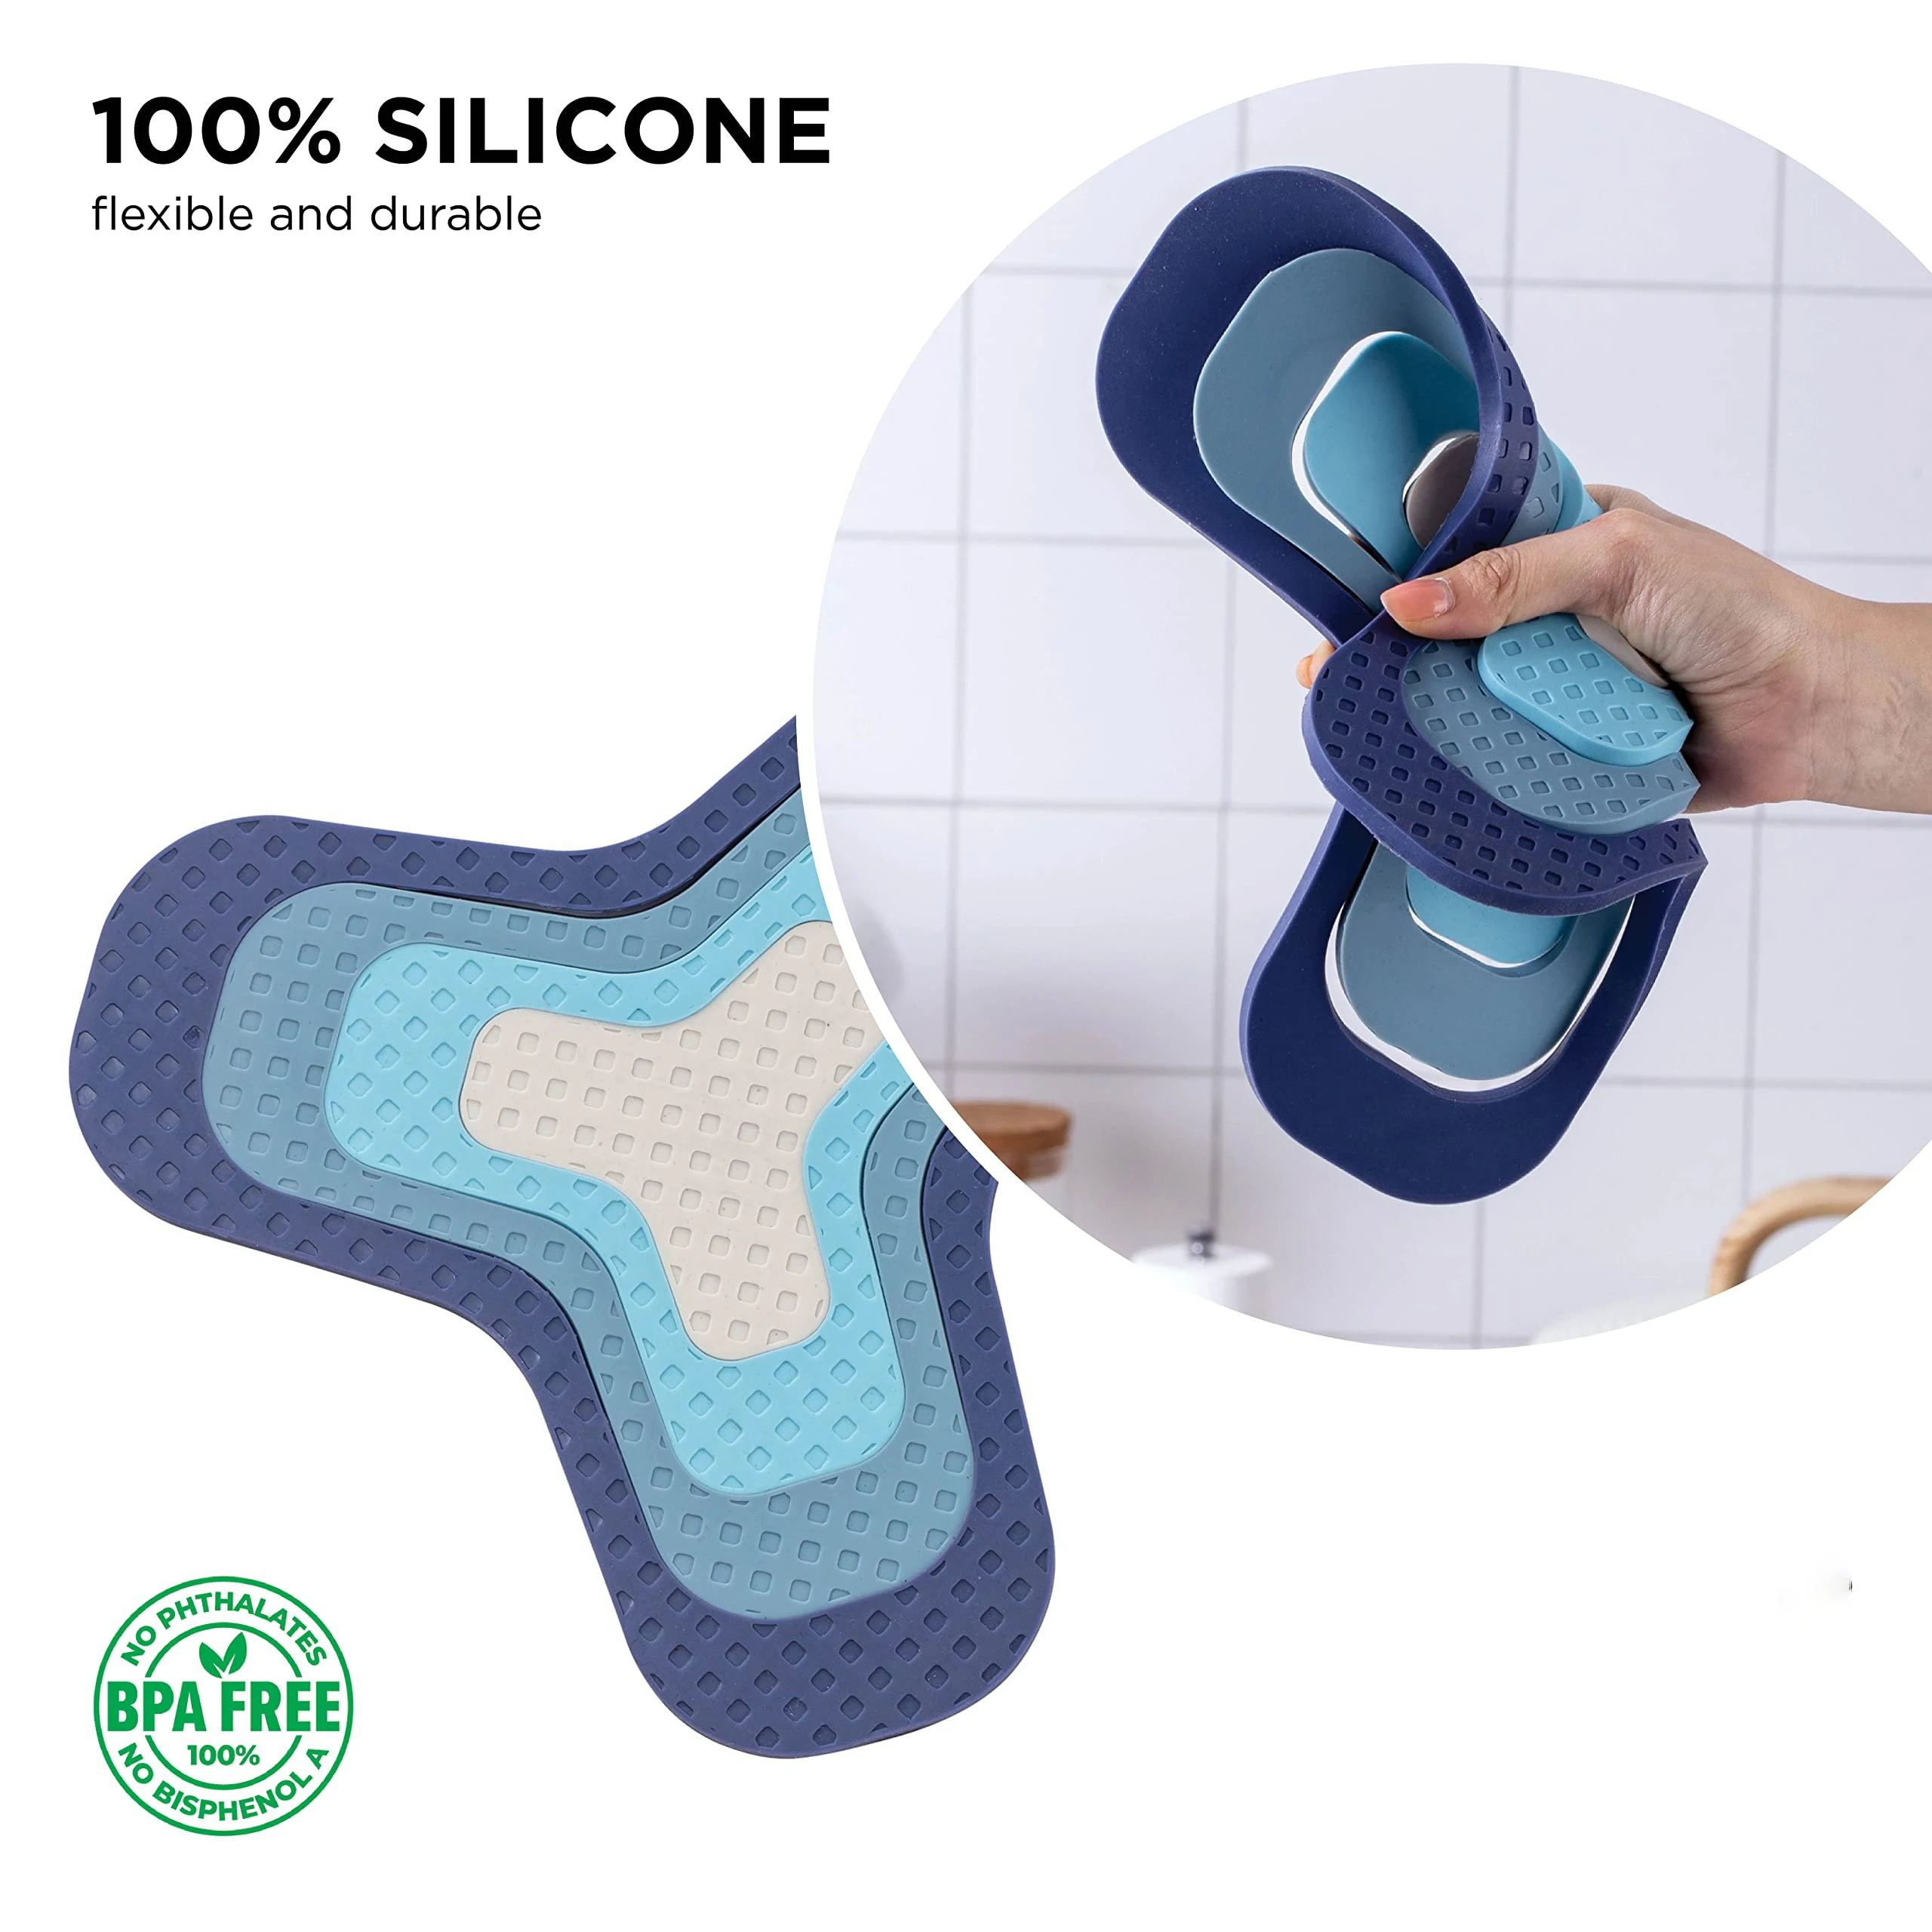 Silicone Trivet Non Slip Heat Resistant Mat Silicone Coasters Silicone Pads for Kitchen Pot Holders